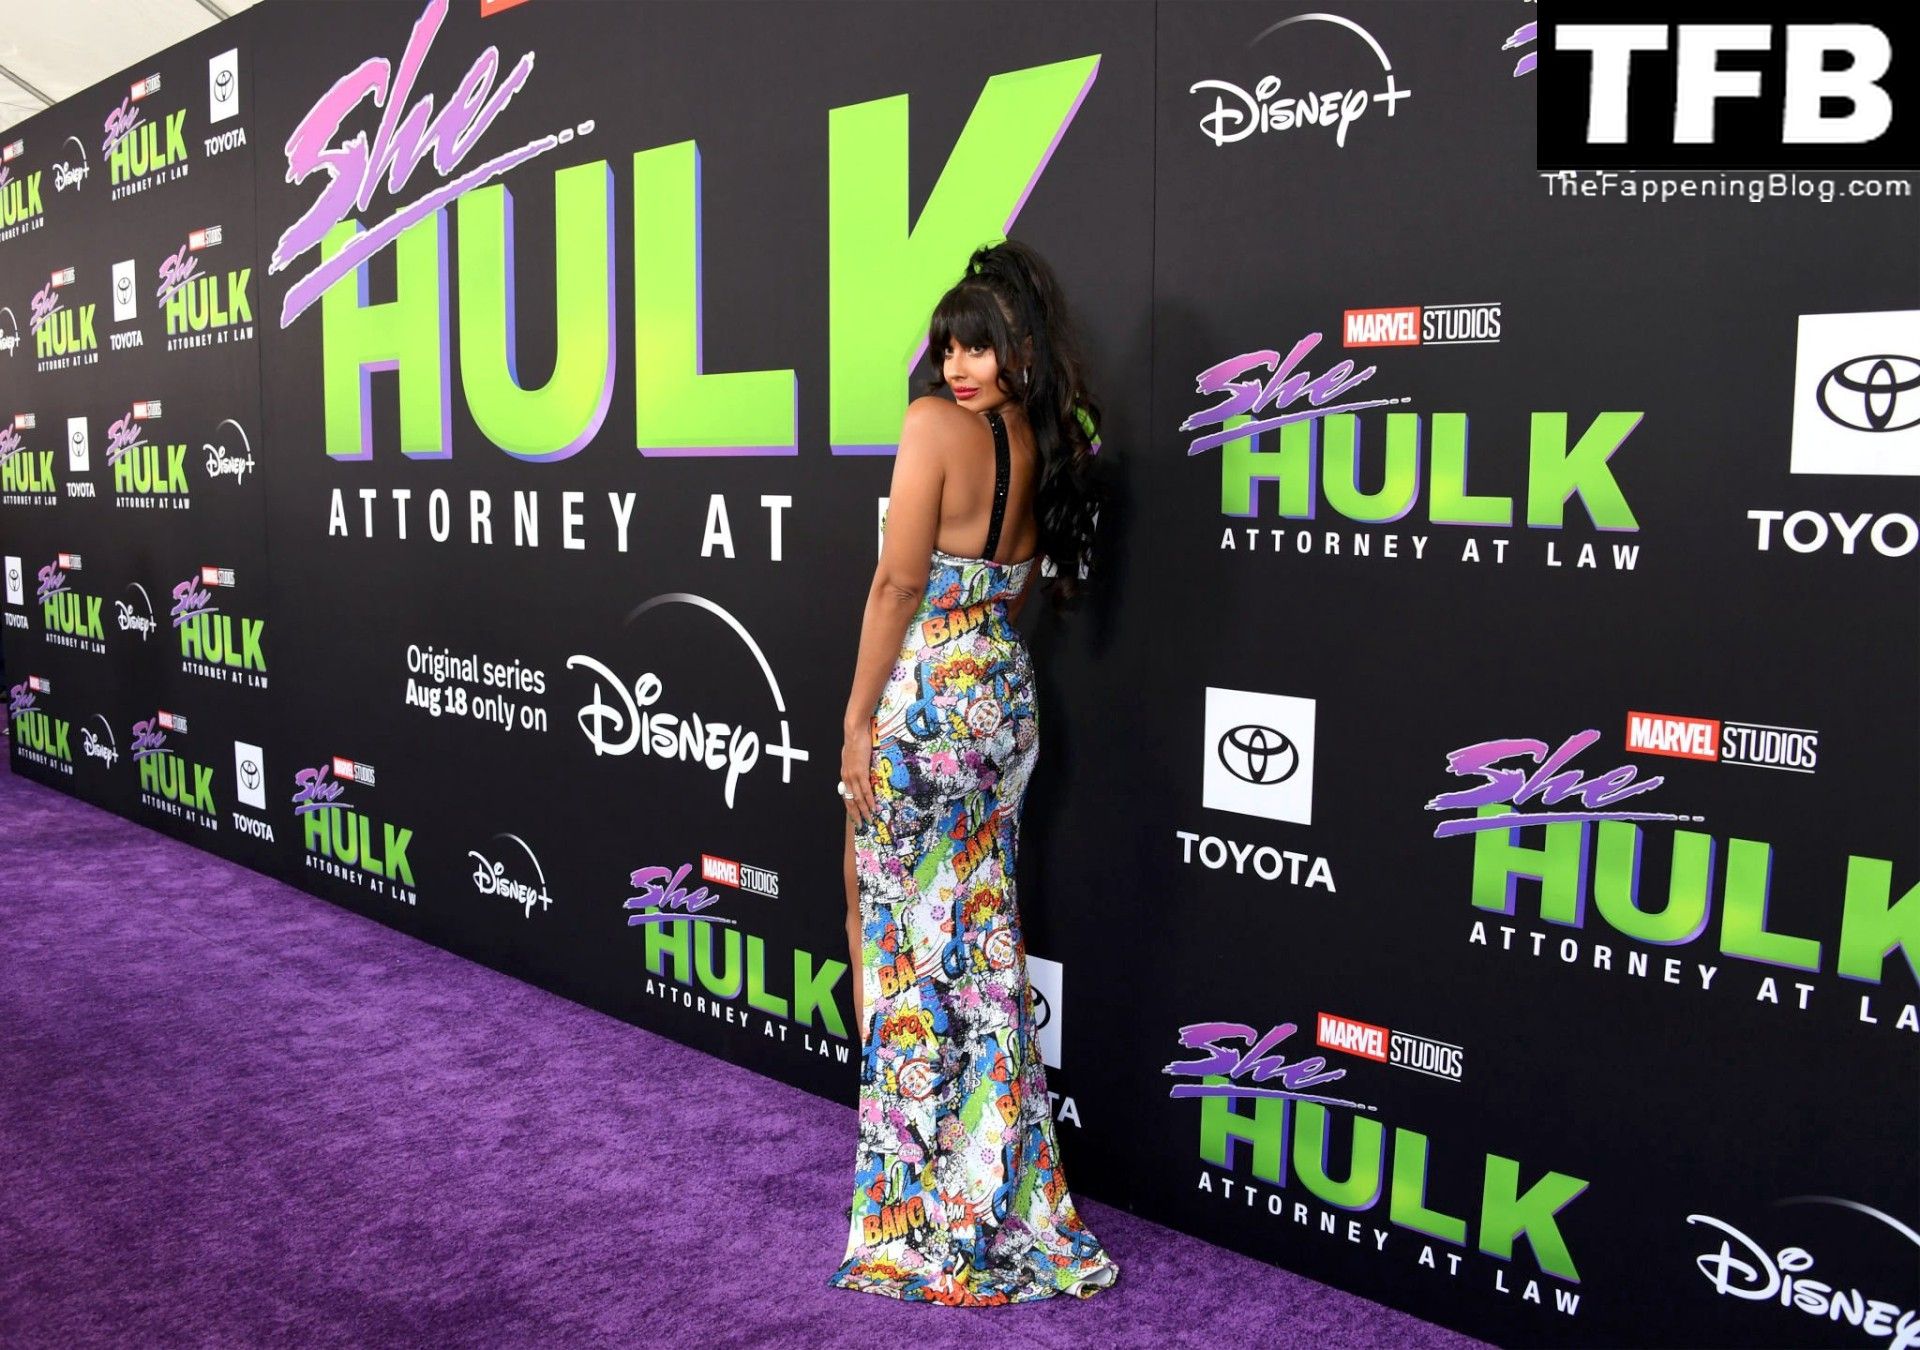 Jameela Jamil Flaunts Her Big Tits at the Premiere of Disney+’s “She Hulk: Attorney at Law” in LA (53 Photos)